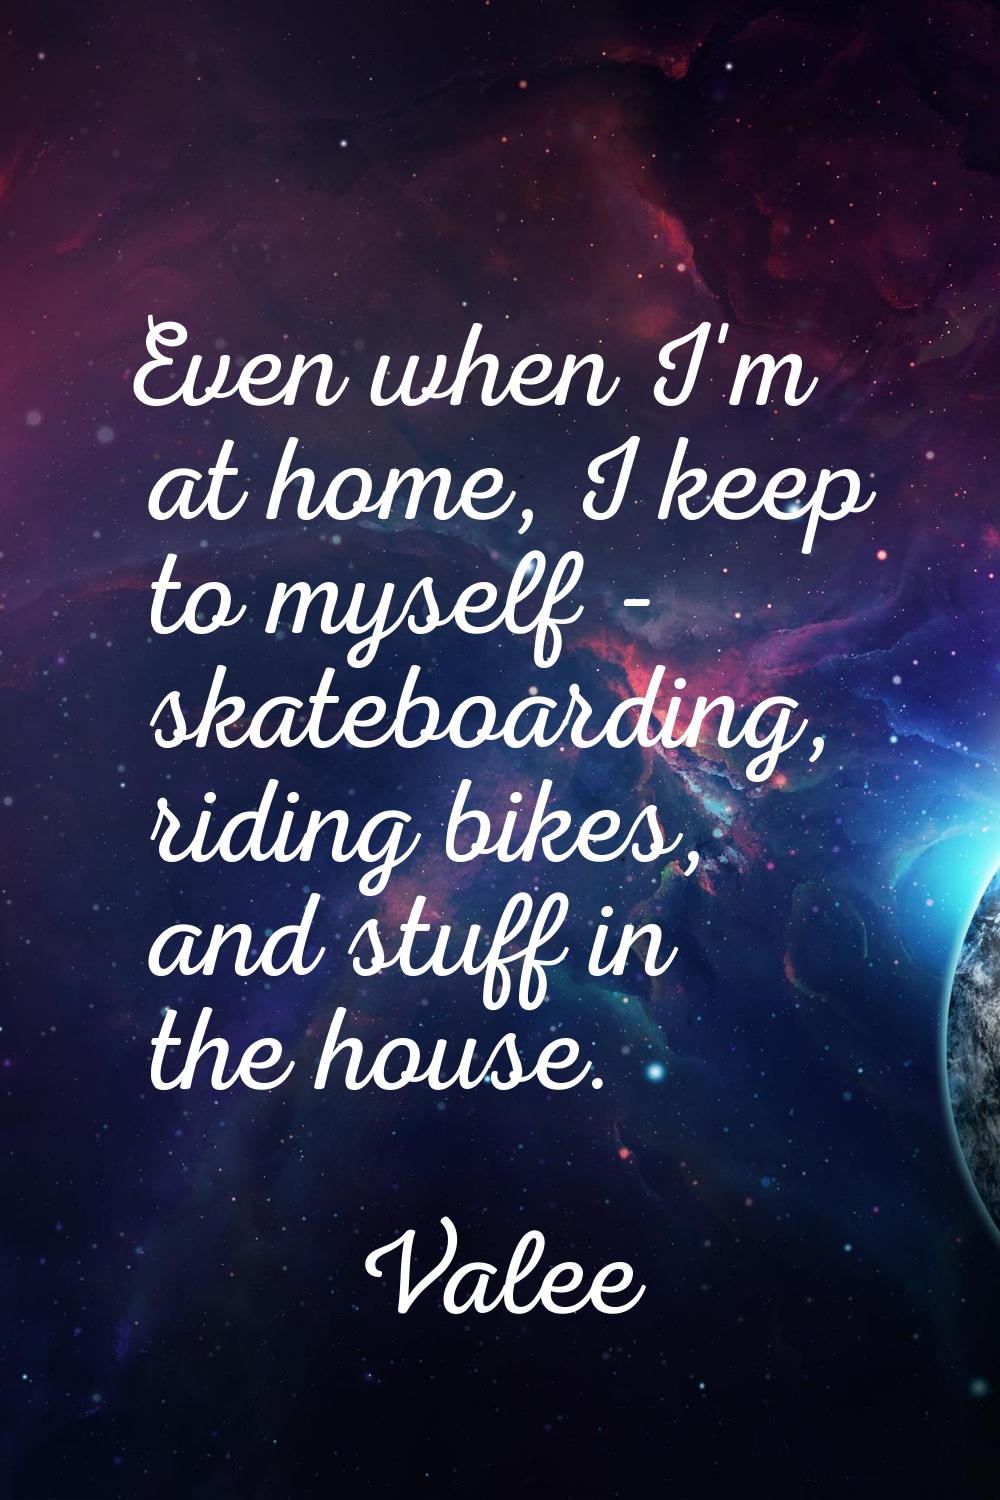 Even when I'm at home, I keep to myself - skateboarding, riding bikes, and stuff in the house.